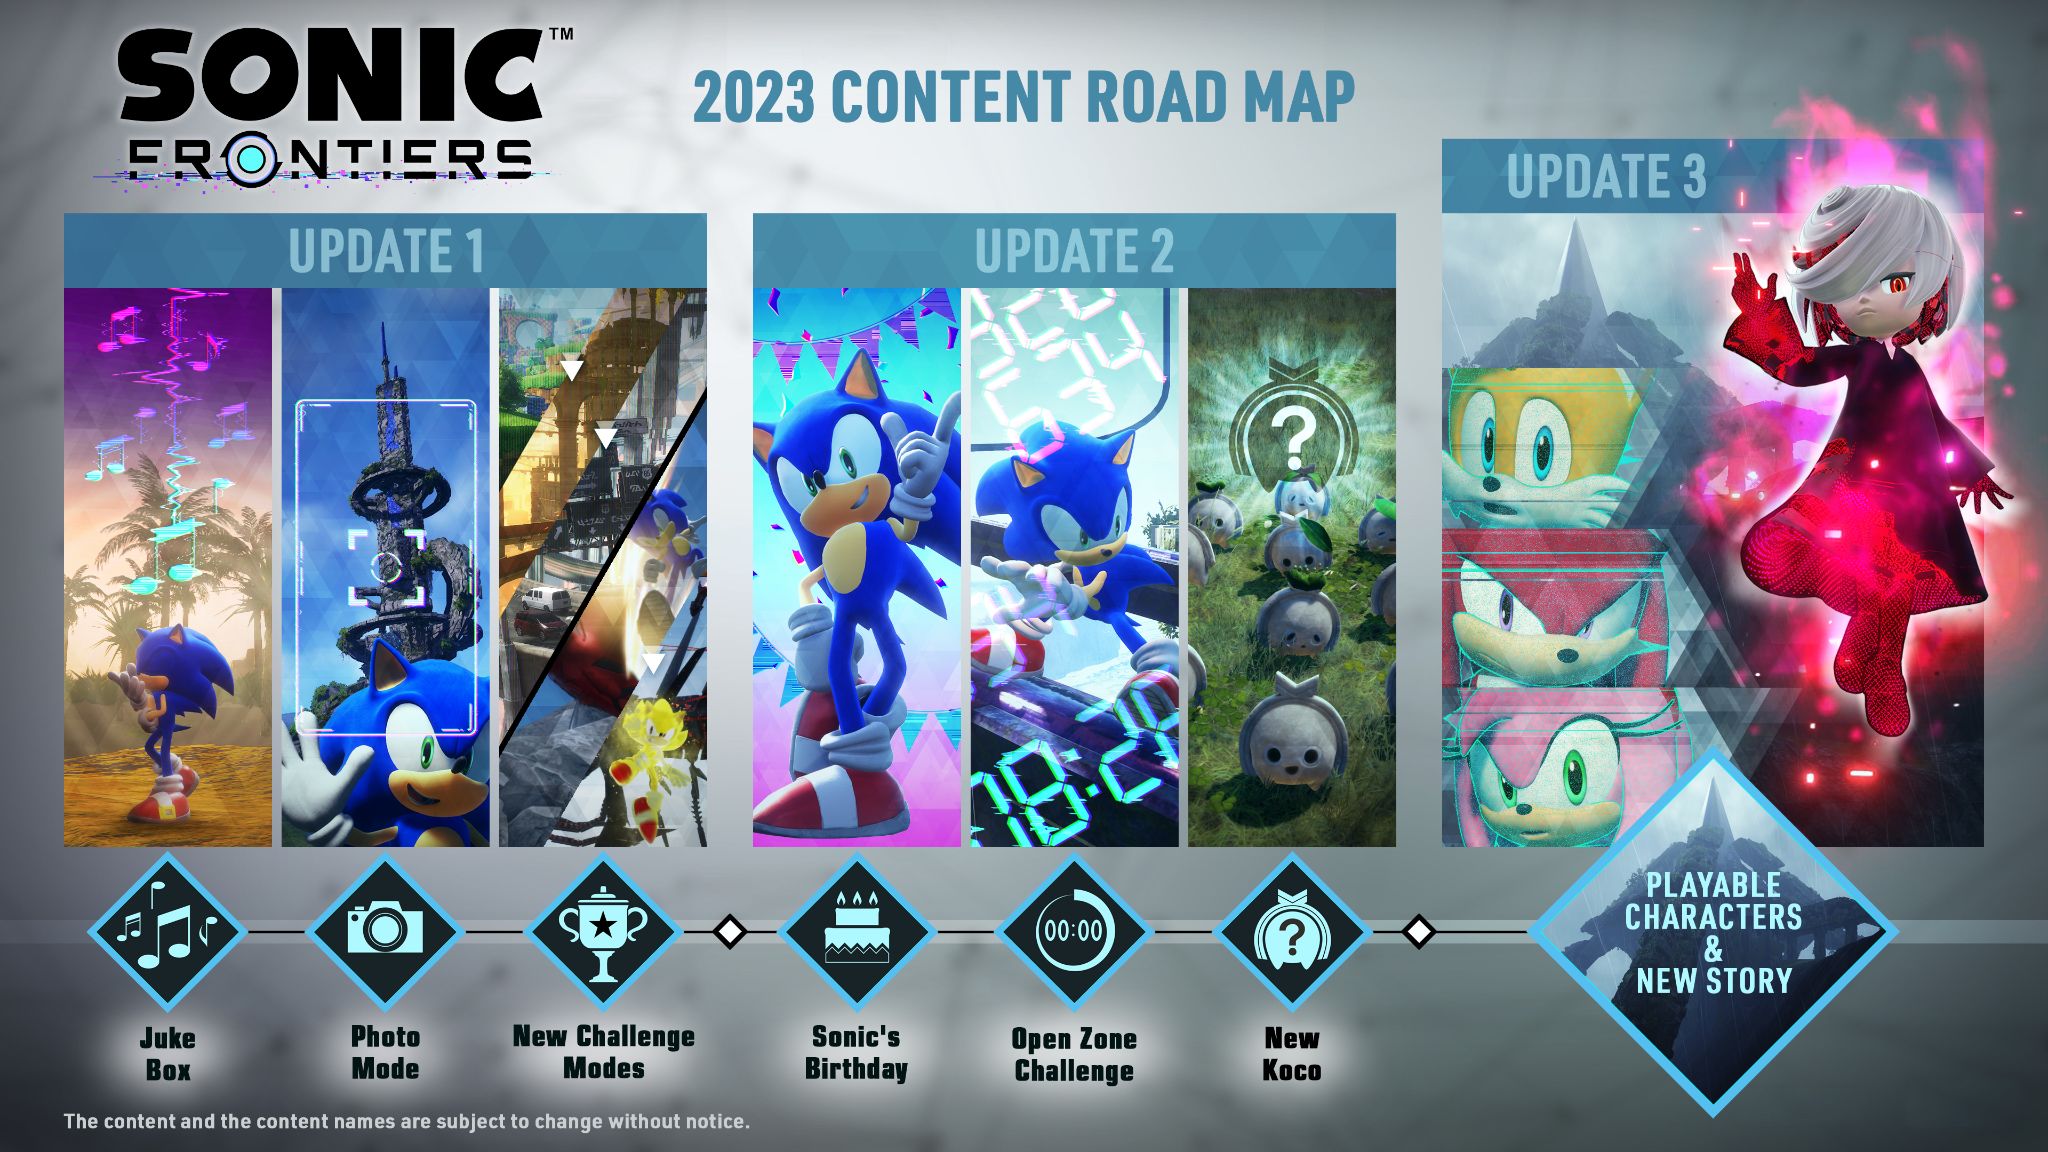 Sonic Frontiers free updates roadmap announced - additional characters, story, and more - Gematsu